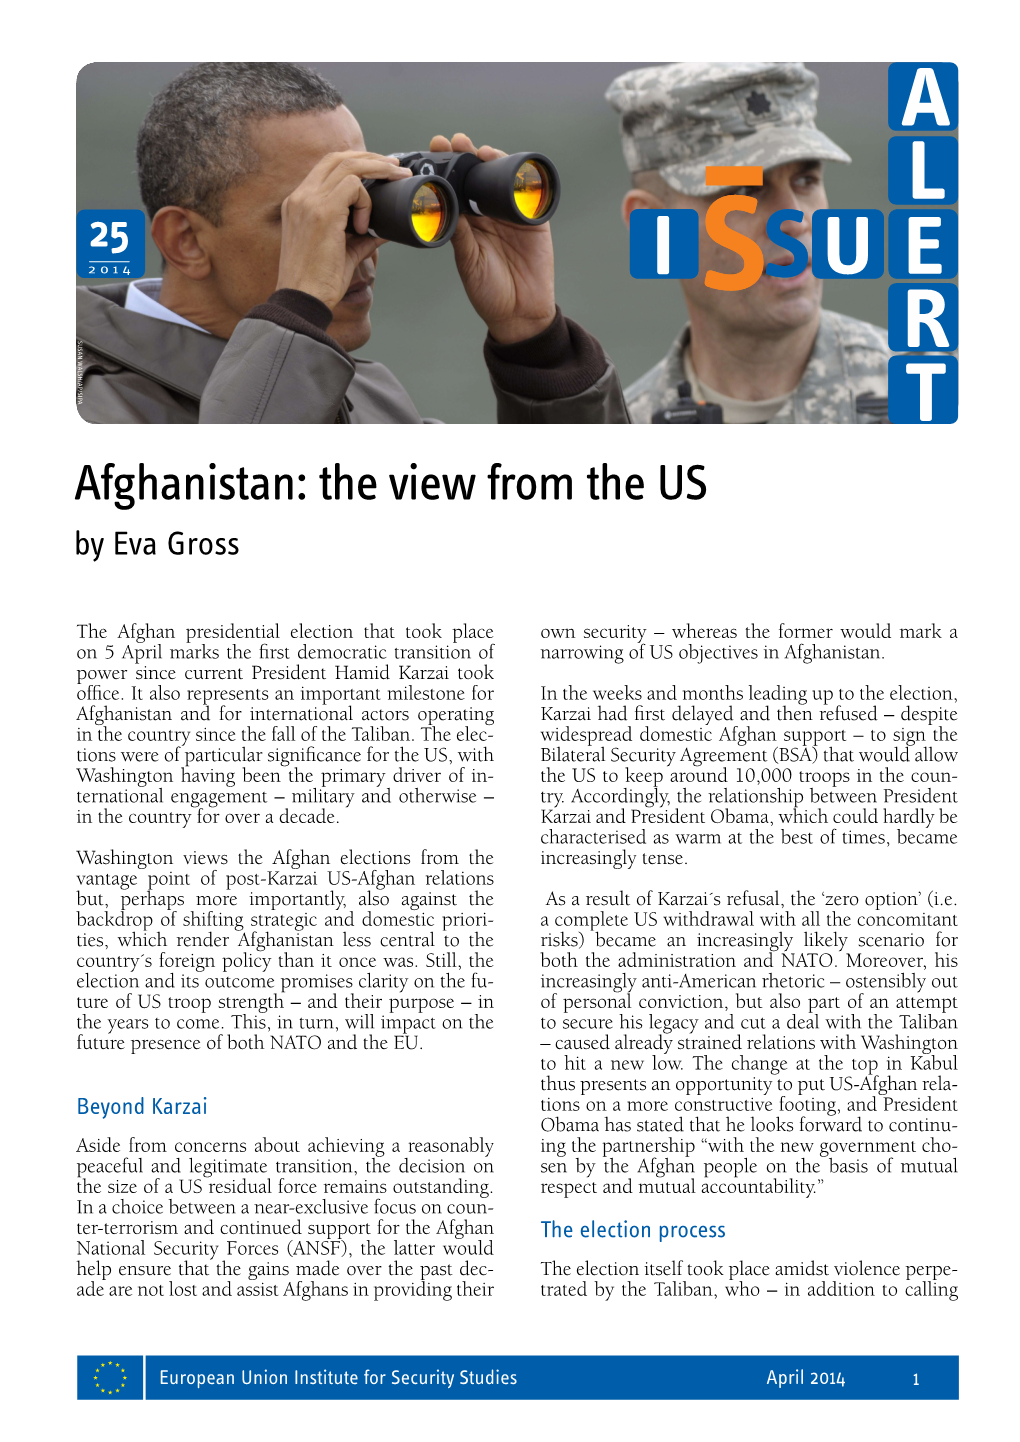 Afghanistan: the View from the US by Eva Gross